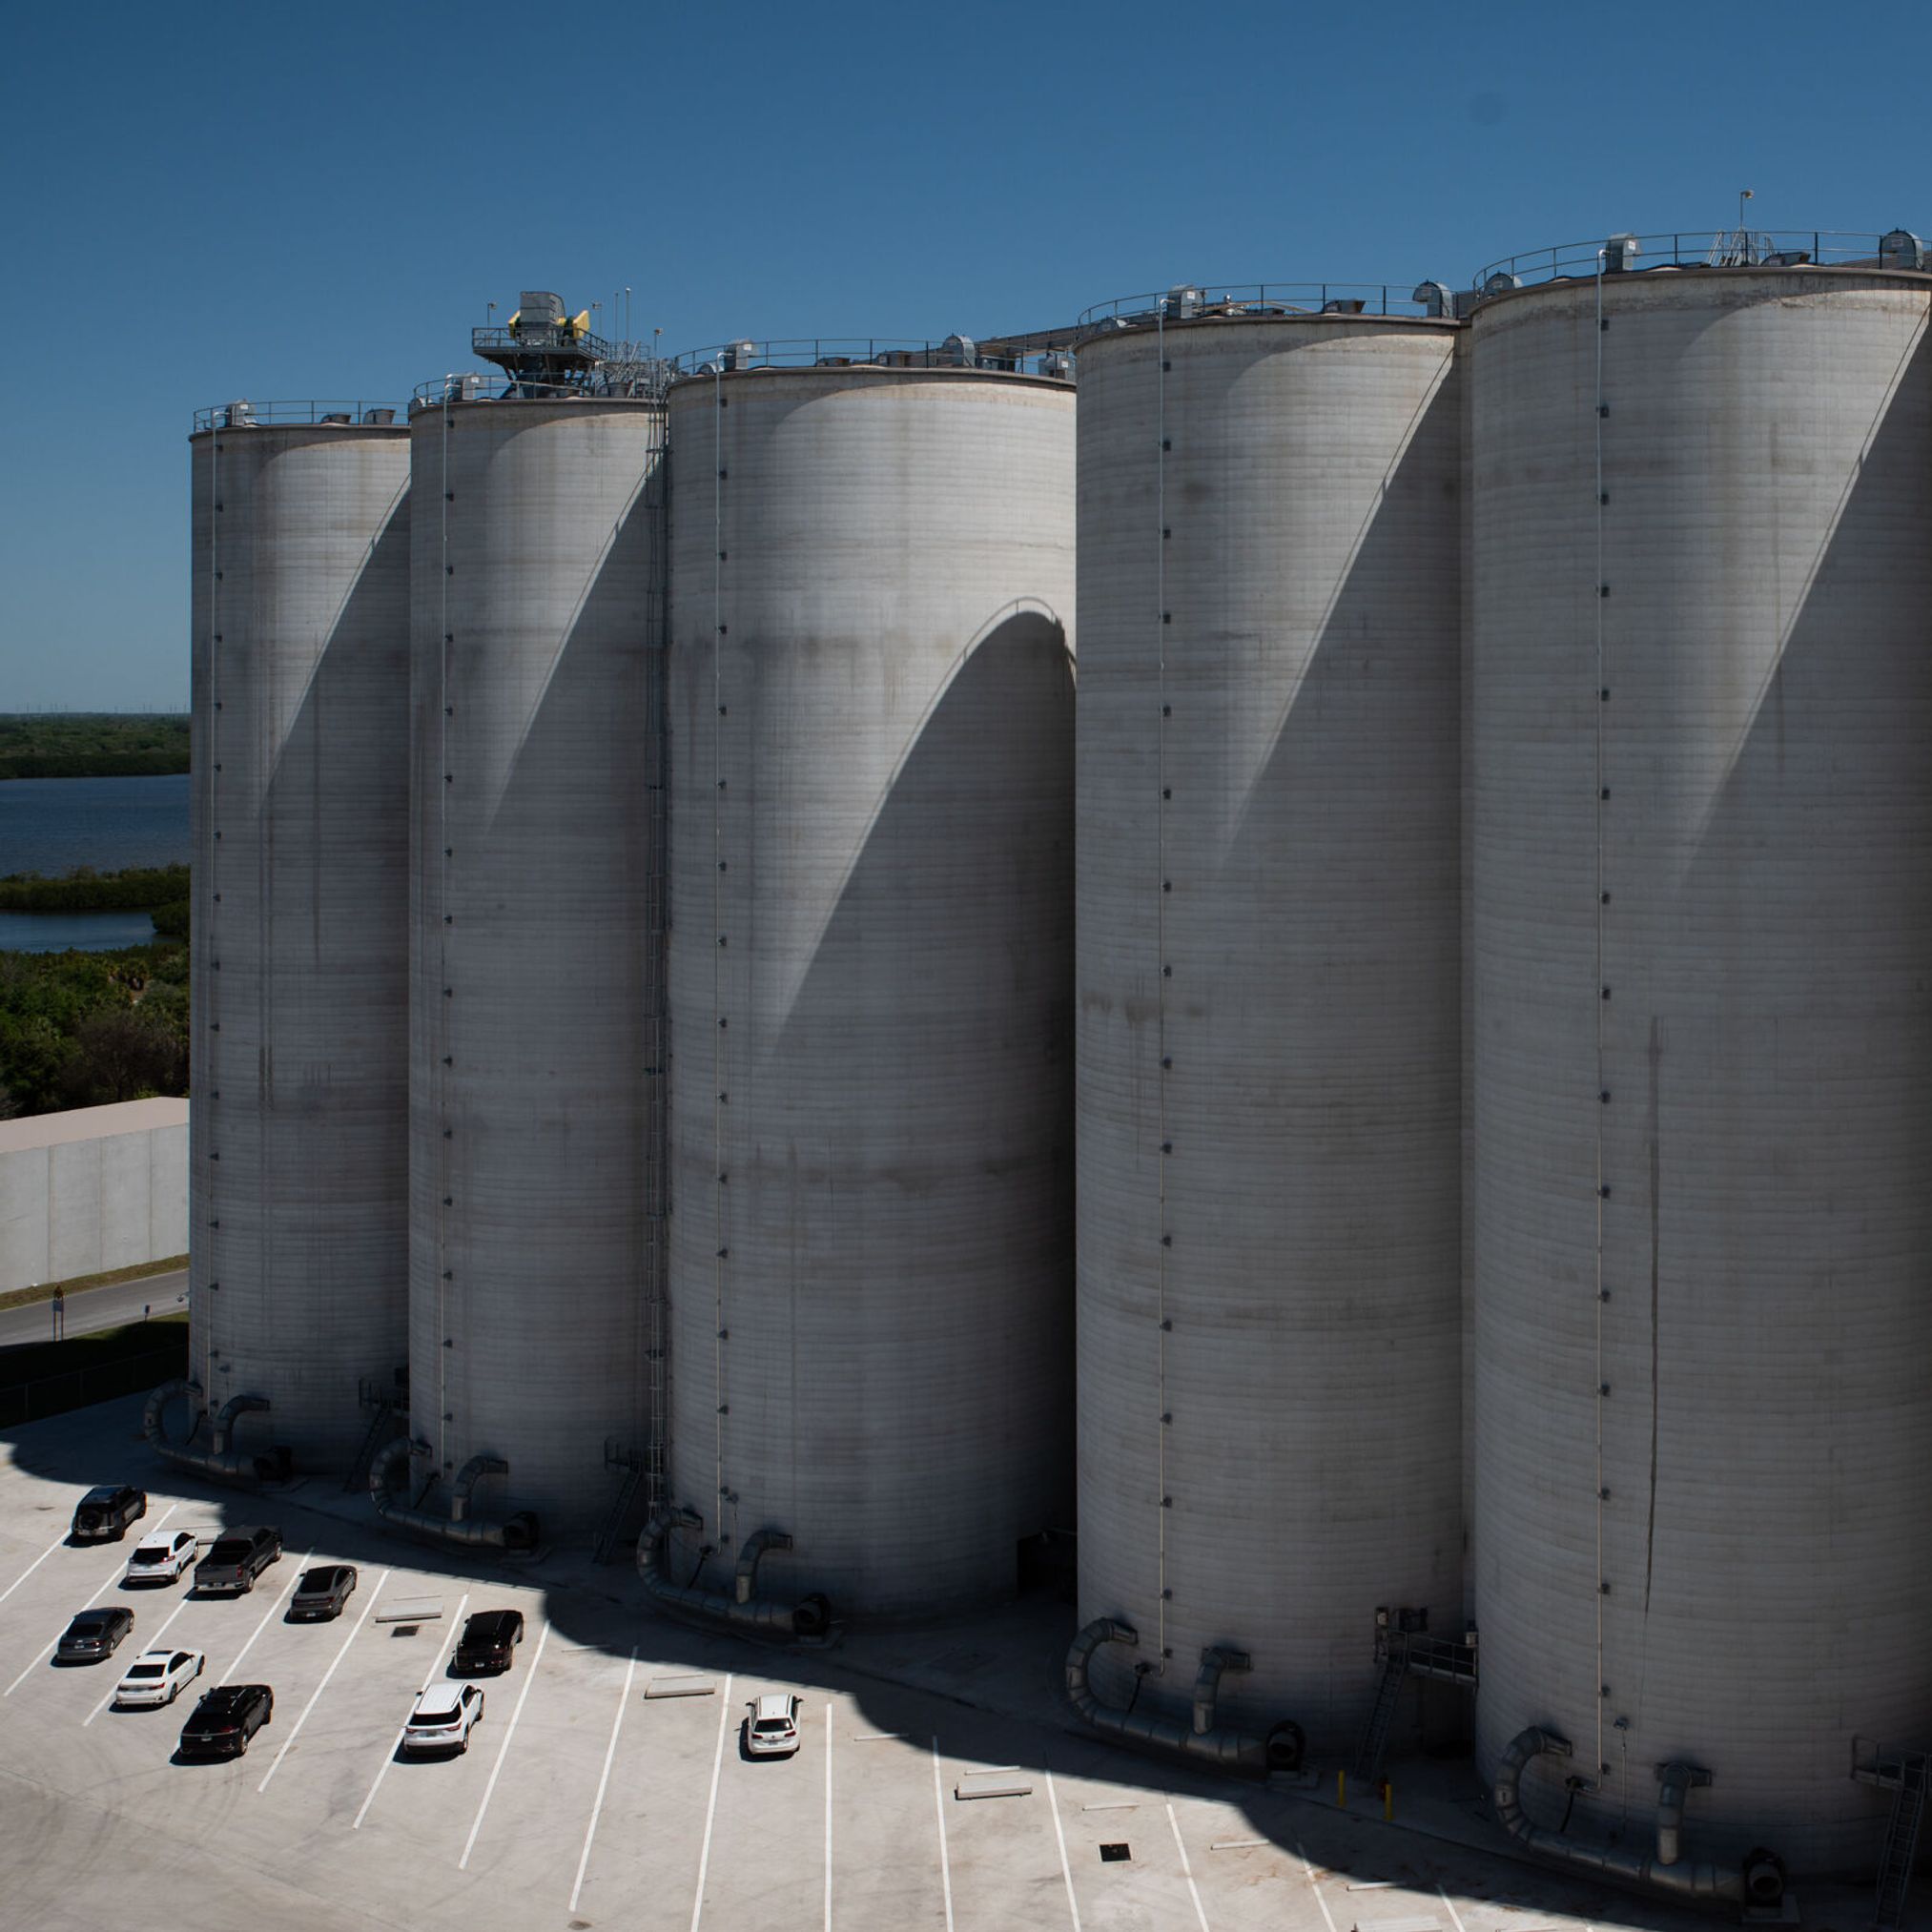 The 160-foot (around 50 meters) silos have a total storage capacity of 111,000 tonnes. 